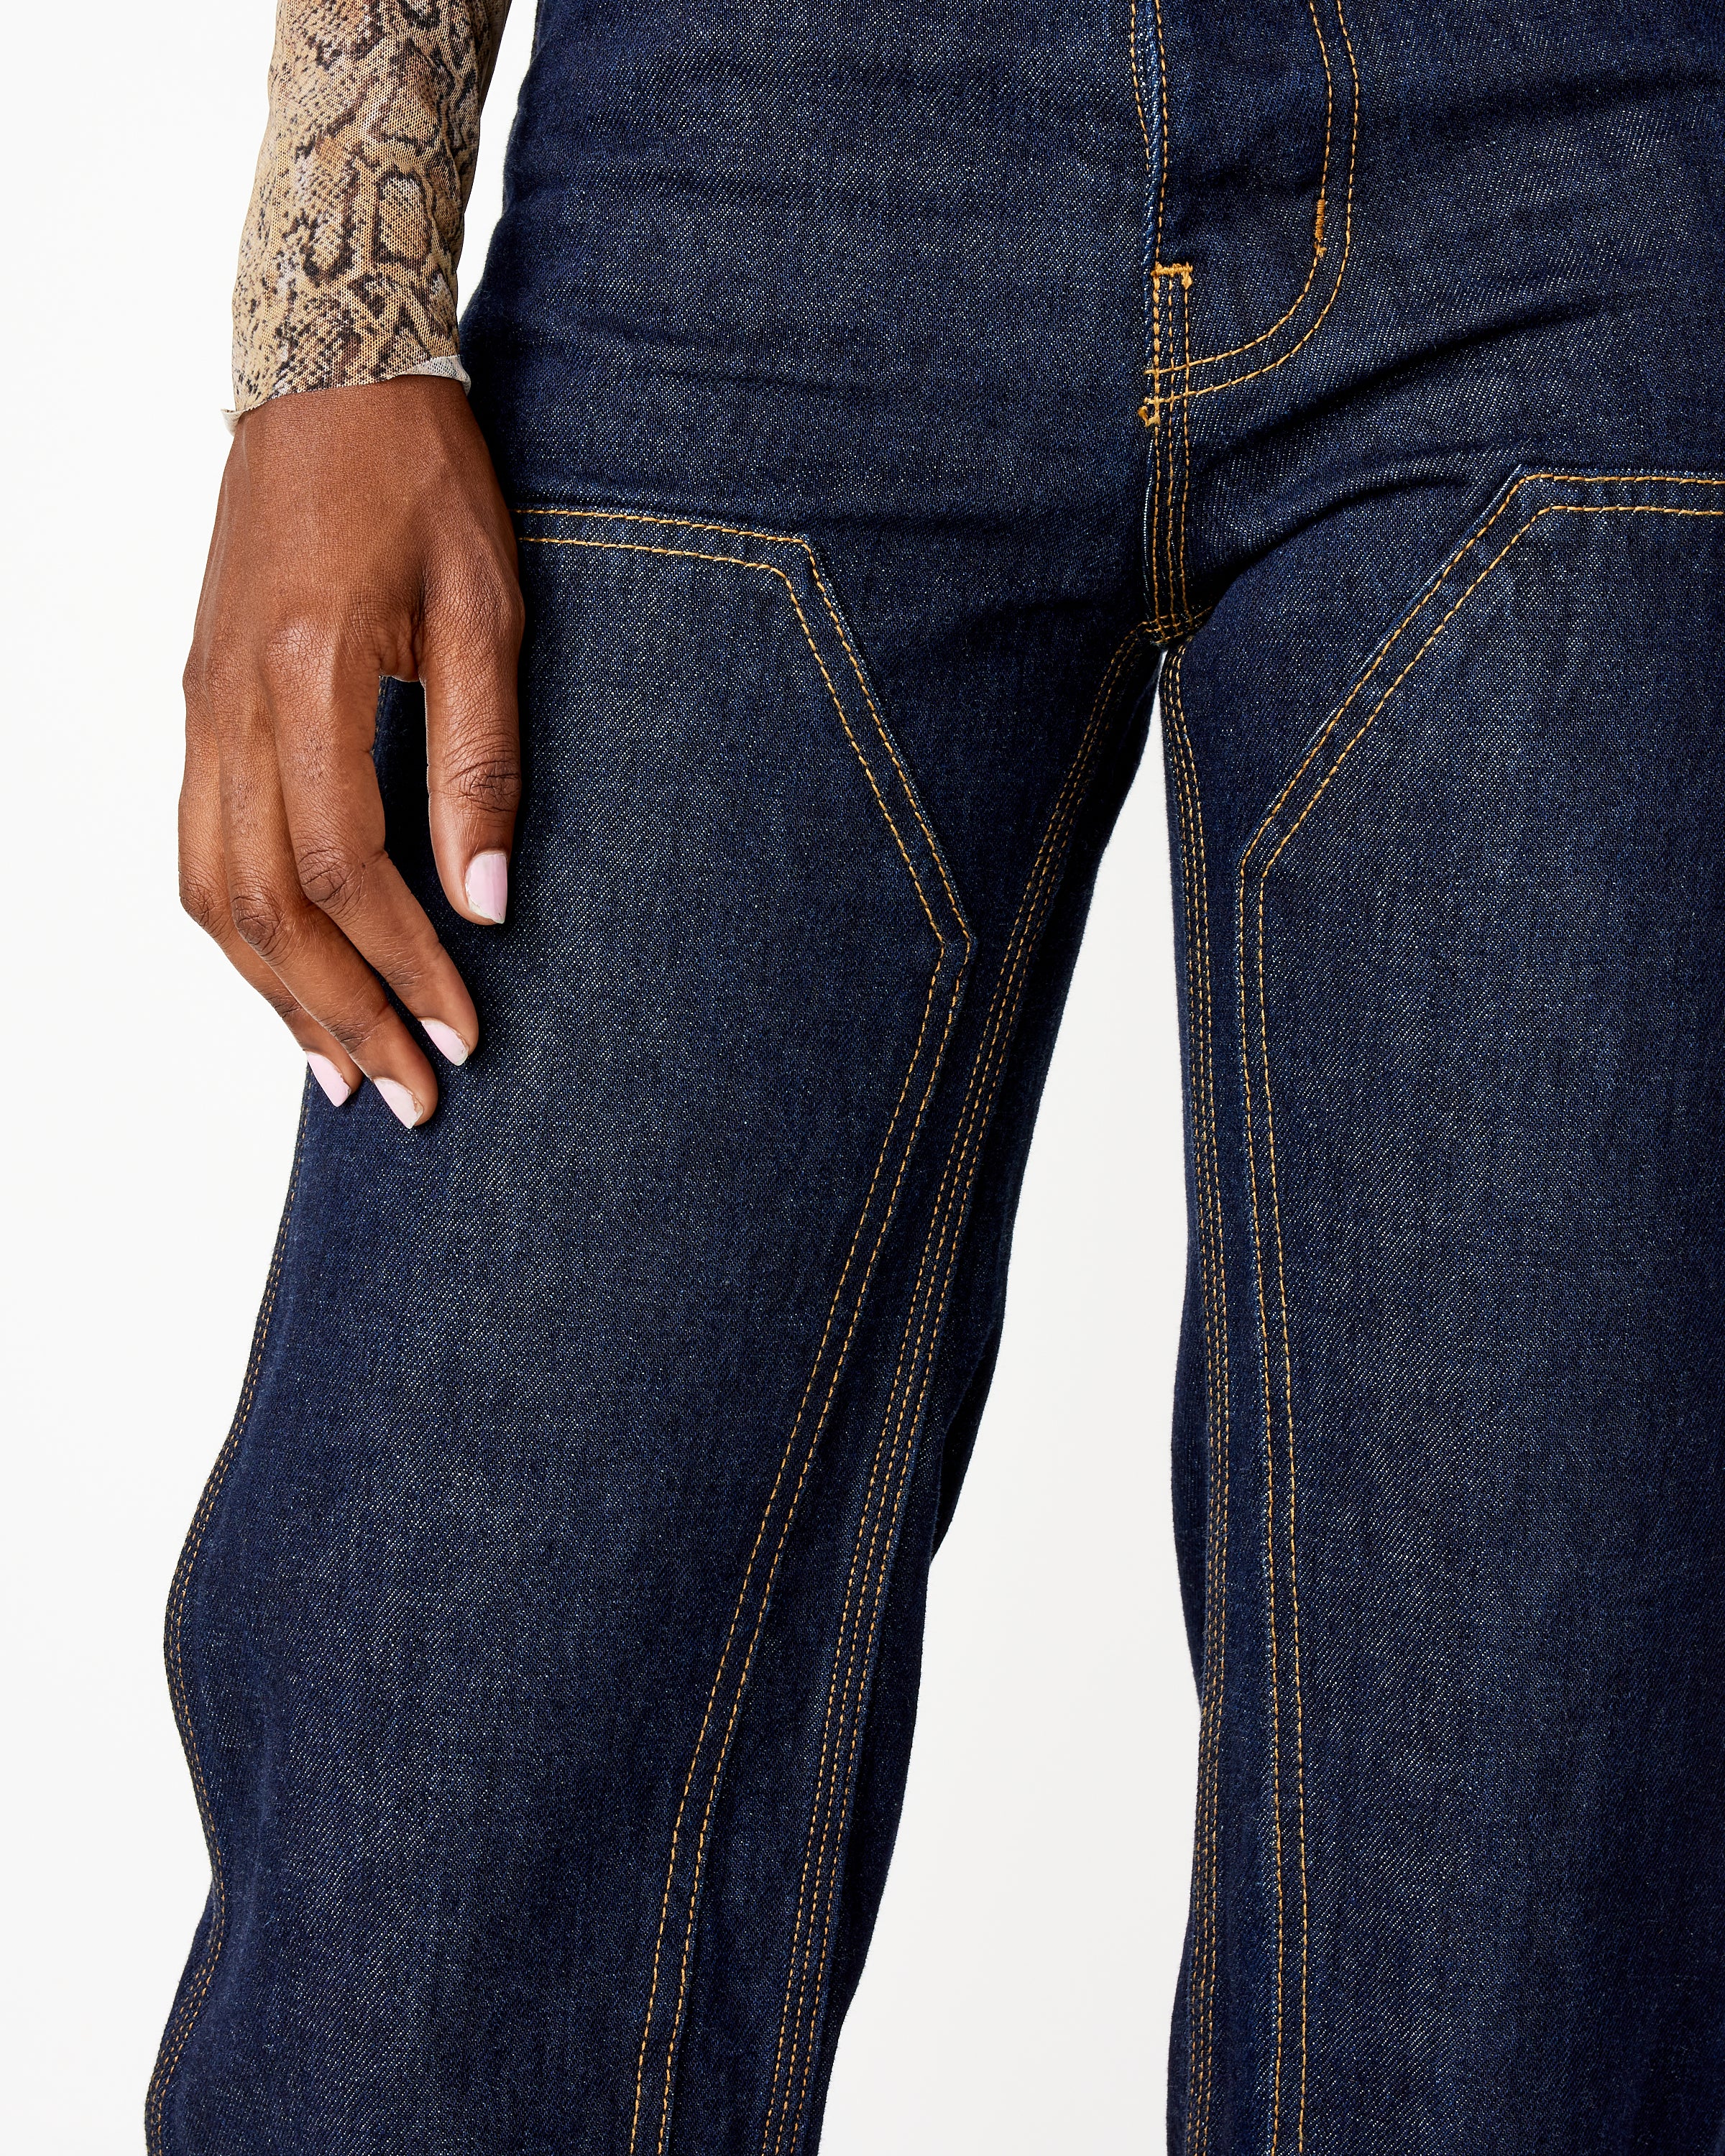 Patchfront Handy Pant in Dark Blue